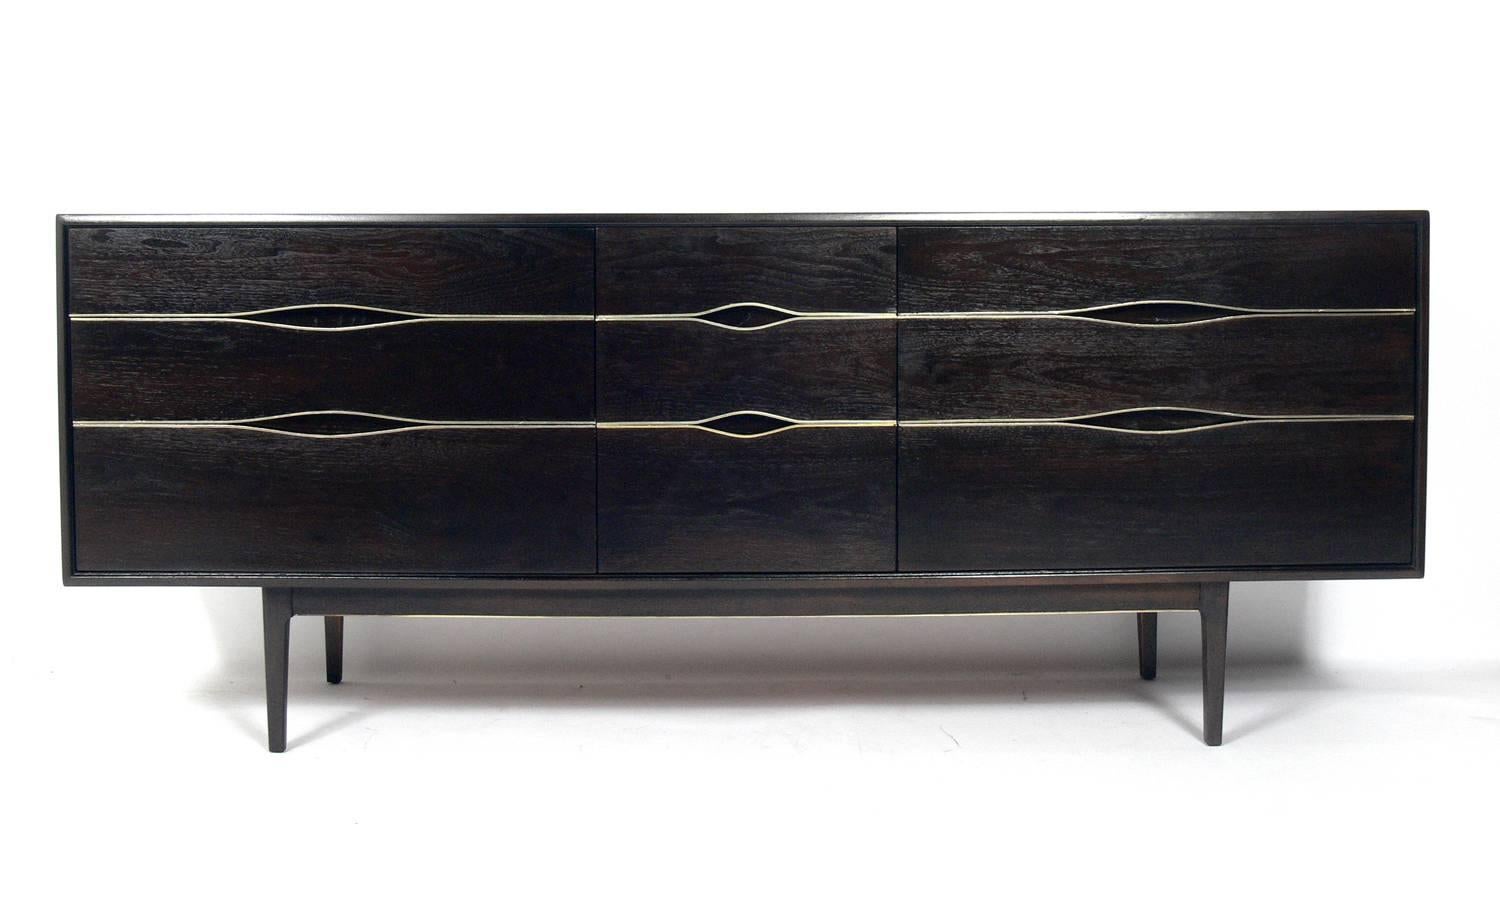 Ultra dark brown Mid-Century chest or dresser with brass trim, American, circa 1960s. This piece has been refinished in an ultra deep brown color and the brass trim has been hand polished and lacquered. It offers a voluminous amount of storage with